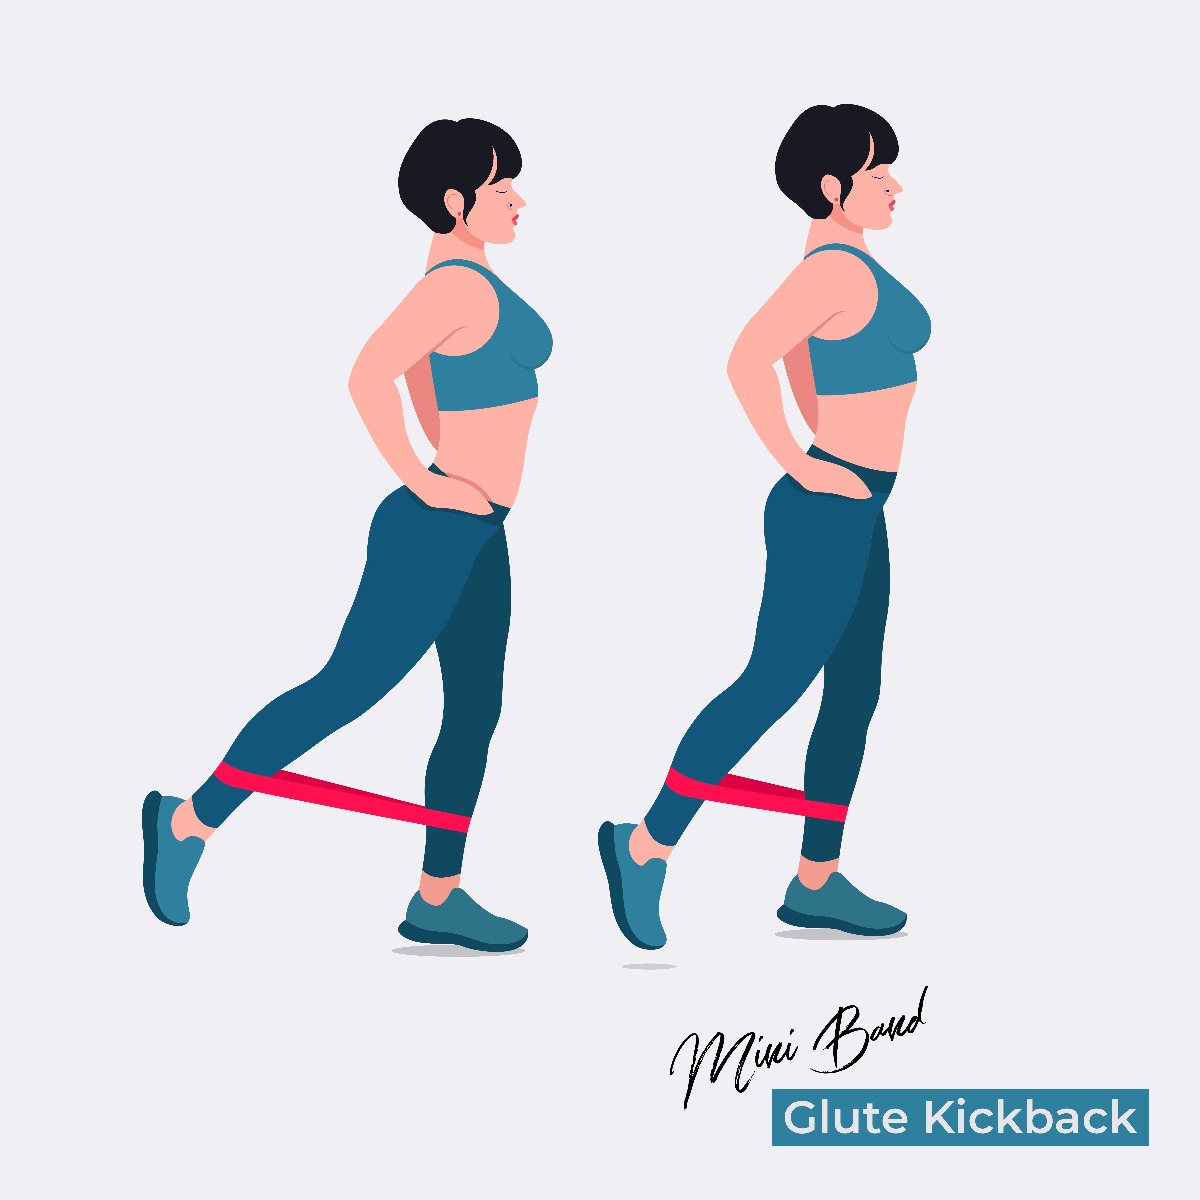 Illustration of a woman with a resistance band around her ankles, kicking 1 leg back & then returning to a standing position